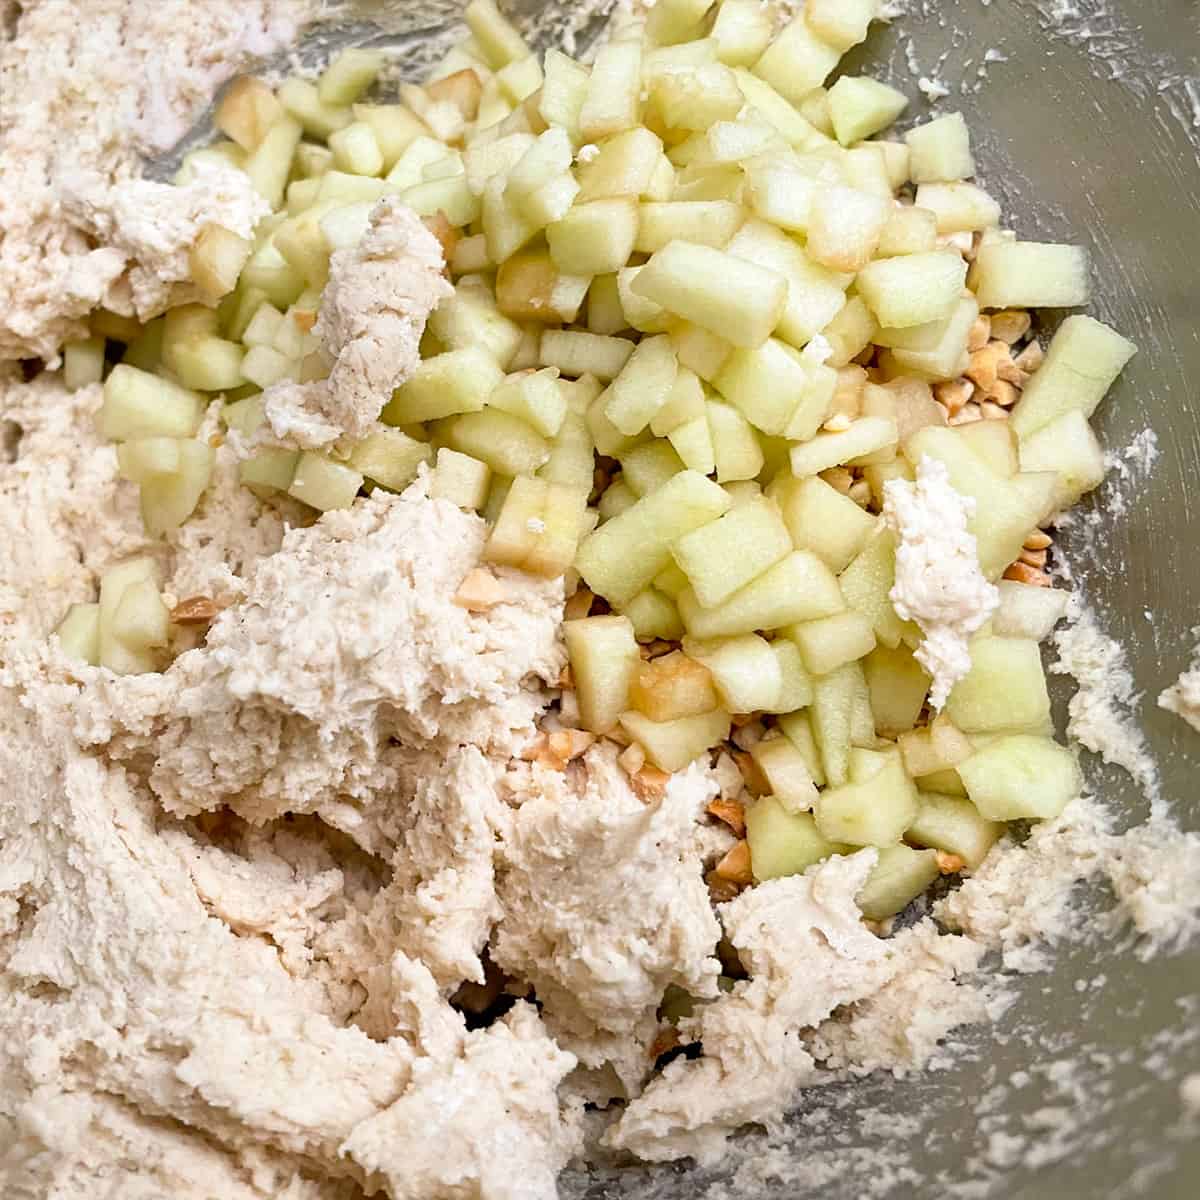 Adding diced apples and chopped peanuts to cookie dough in a mixer bowl.